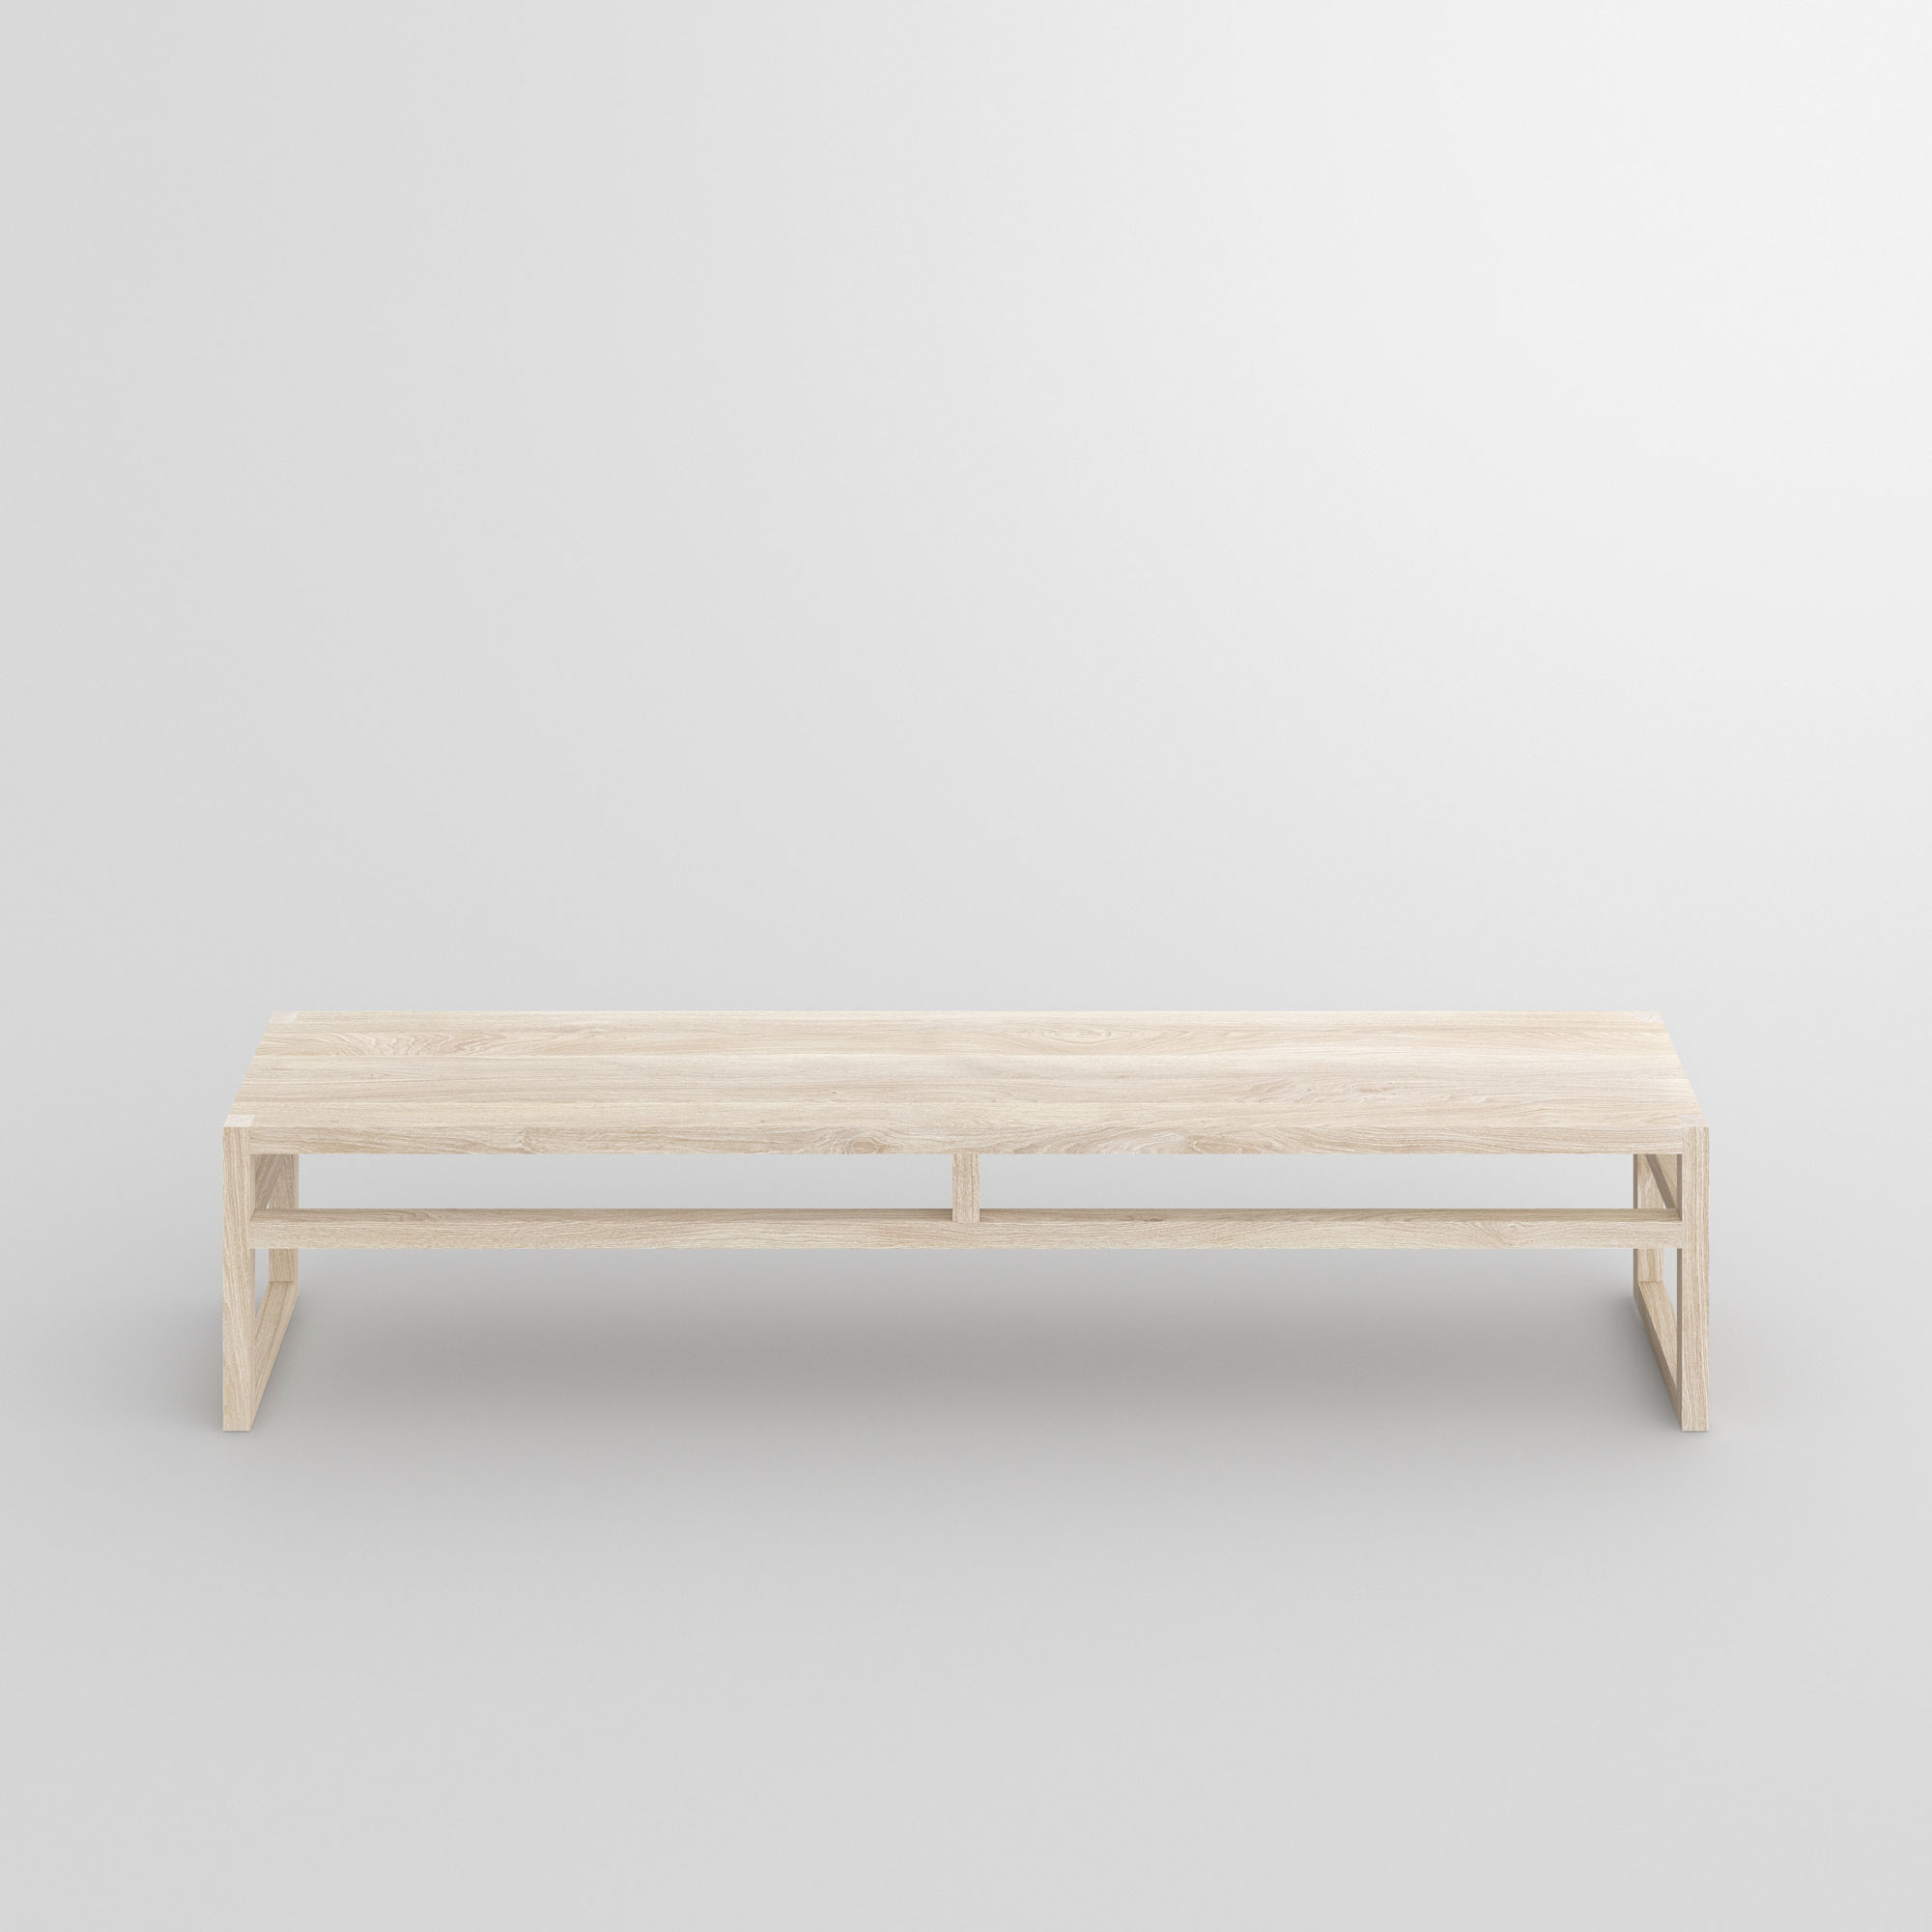 Dining Room Wood Bench SENA cam3 custom made in solid wood by vitamin design